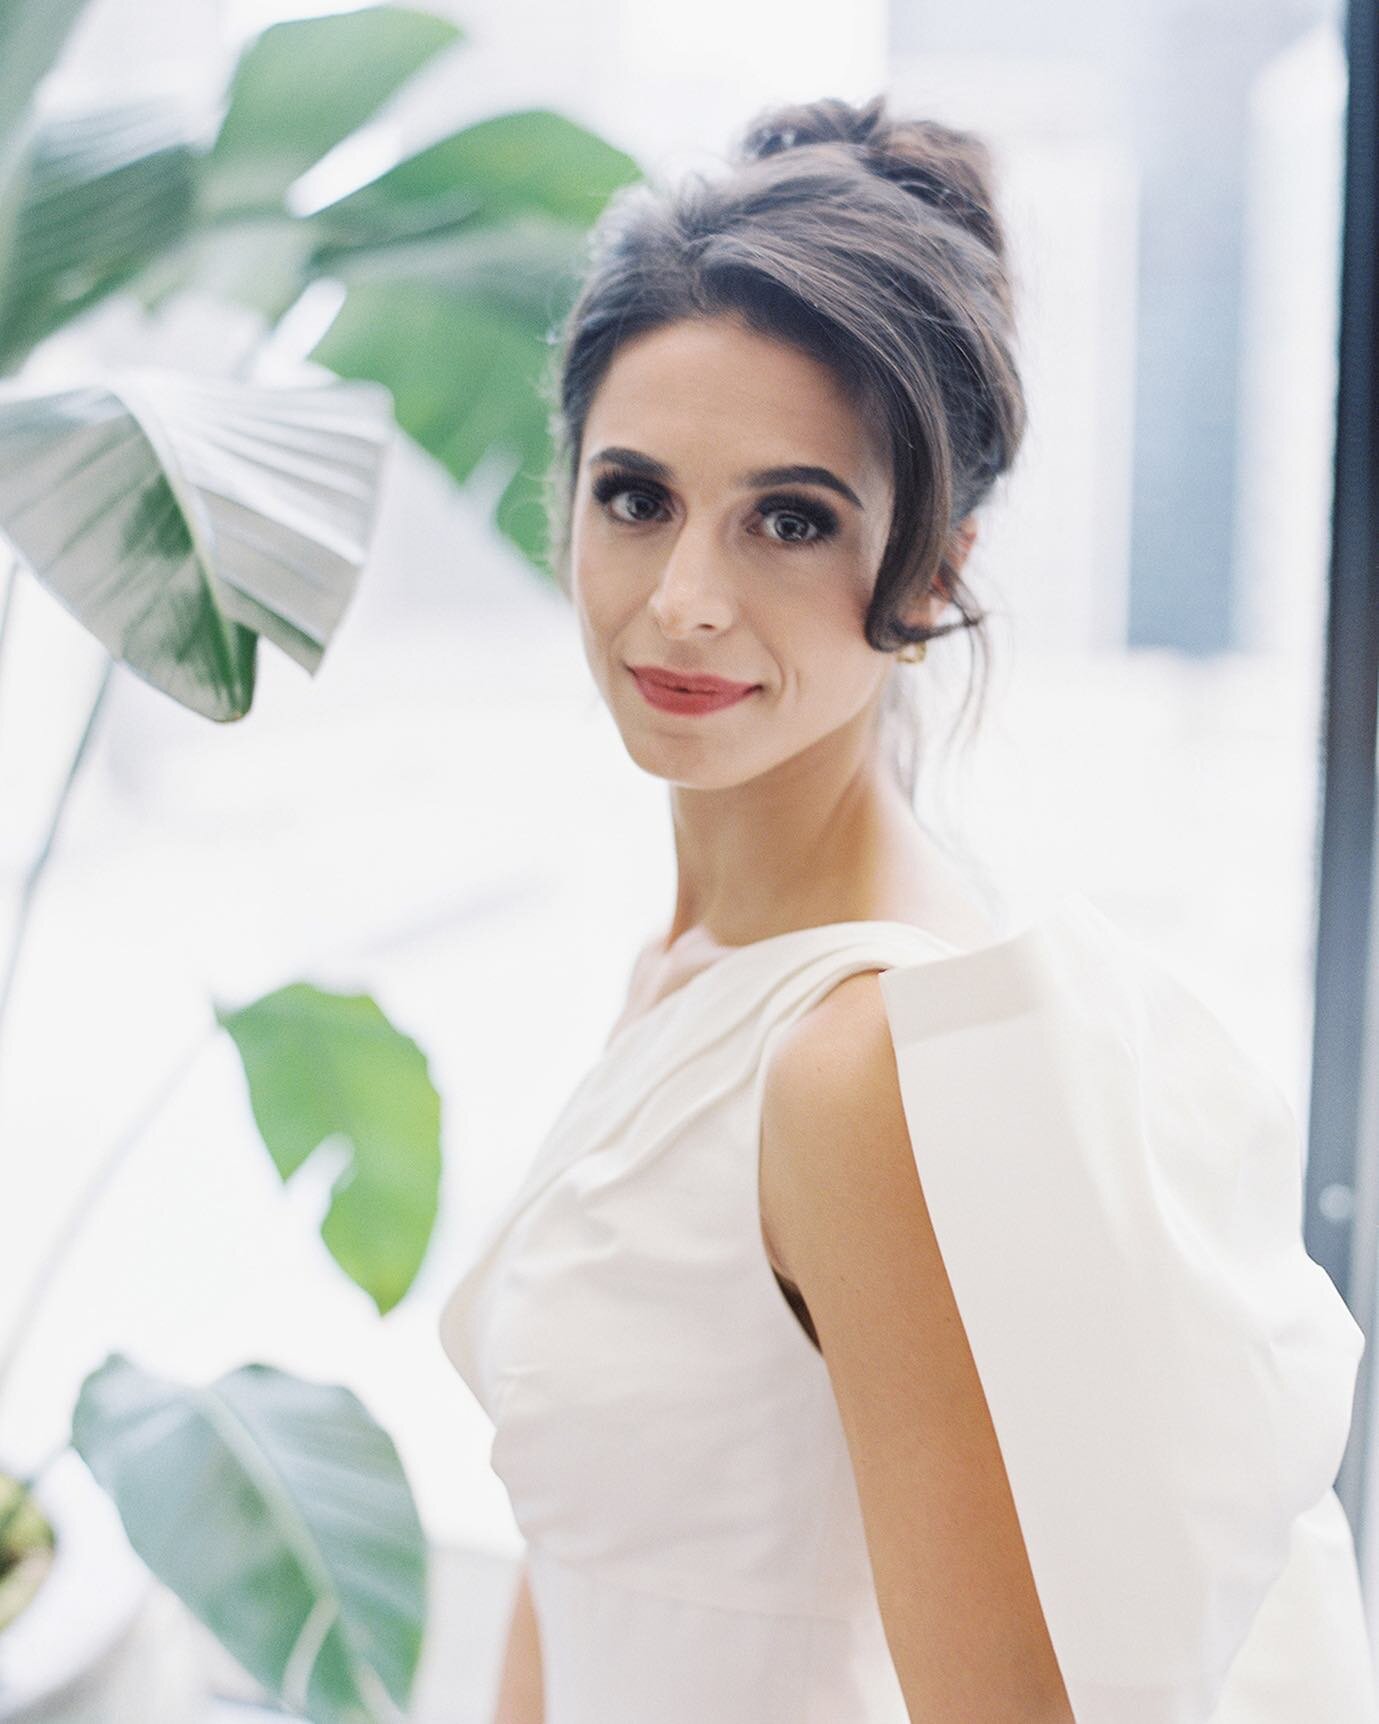 Anahita was so serene and relaxed the morning of her wedding. This was moments before her first look with Jason and she just exuded a happy calmness. Made for a beautiful portrait and a morning she will never forget.
.
.
.
.
.
.
Hair and Makeup @erin